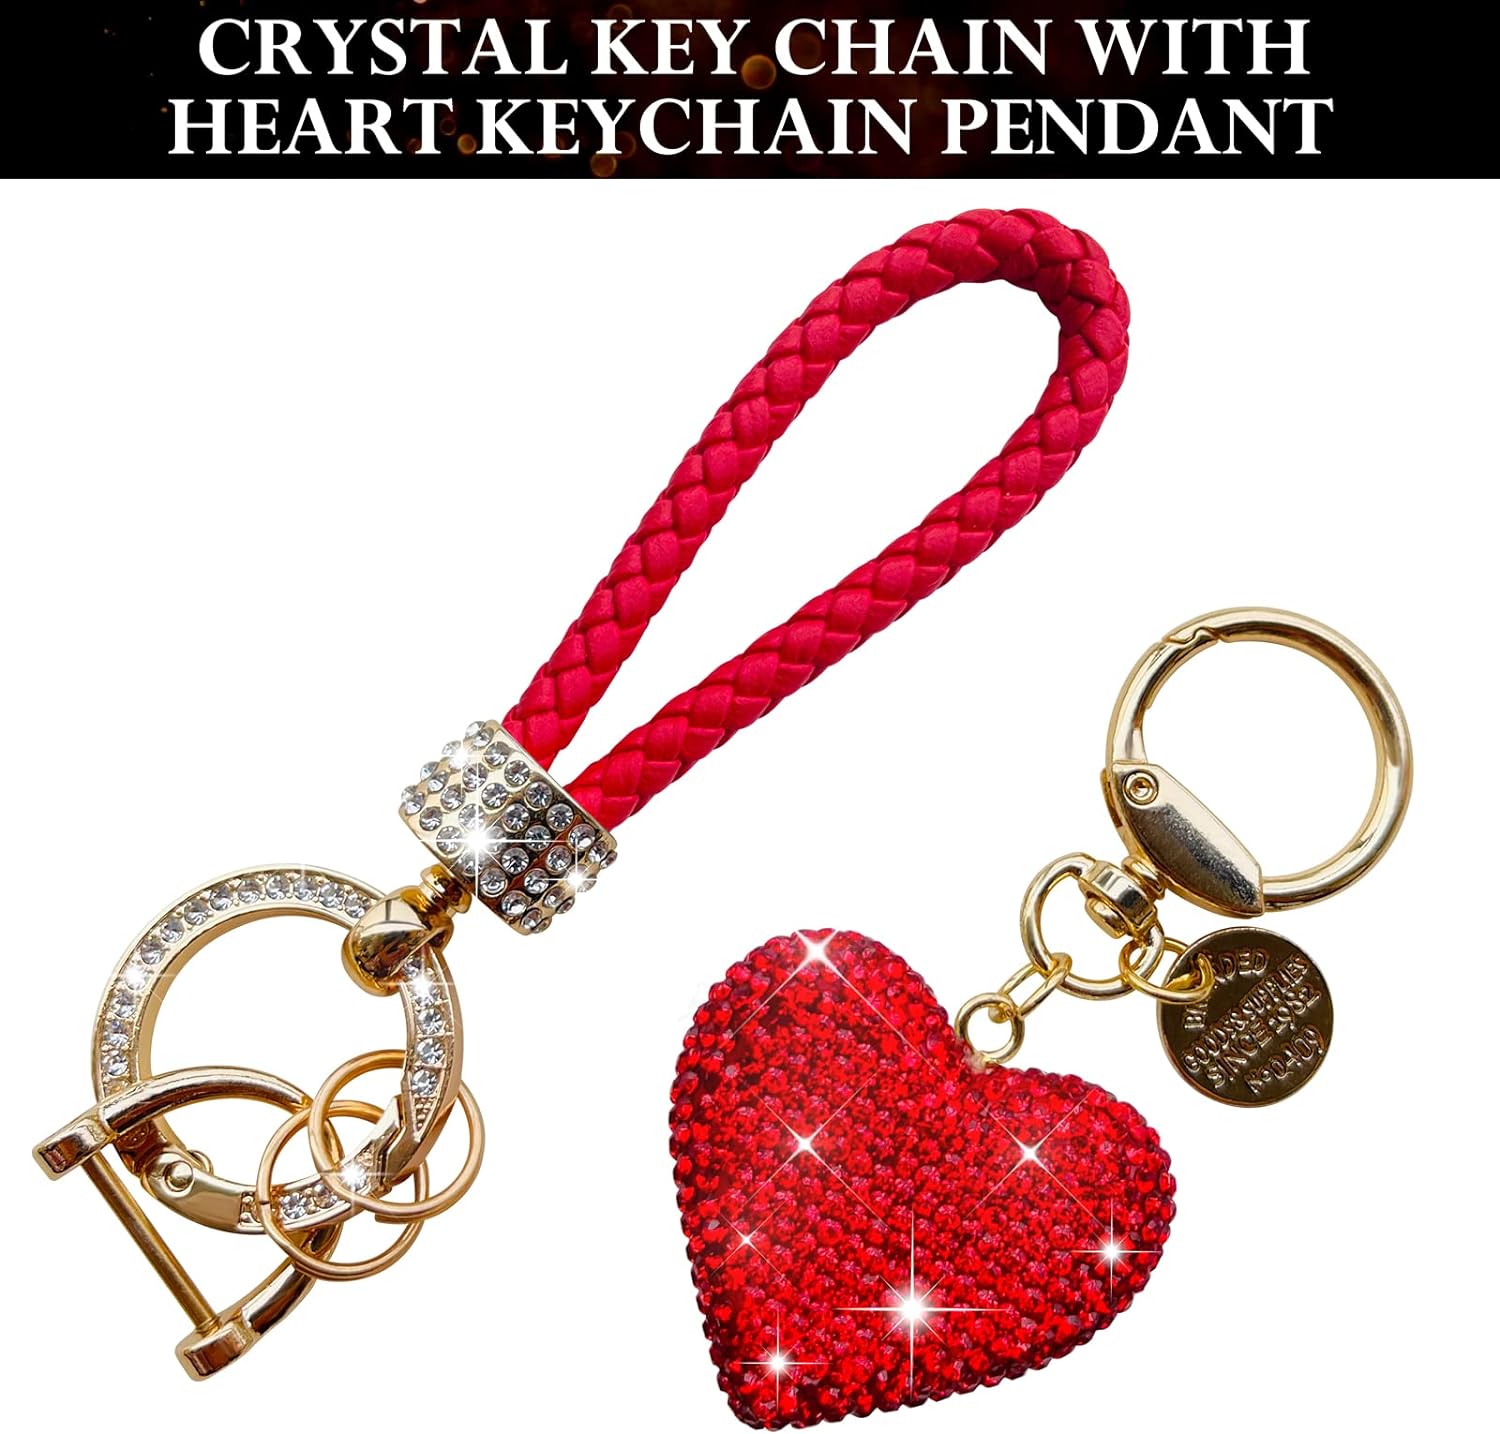 TX-INNO AUTO Crystal Car Keychain for Women with Sparkly Rhinestone Heart Shape Keychains Pendant Cute Keychain, Bling Red Heart Luxury Car key Chain Accessories for Women and Girls Gifts